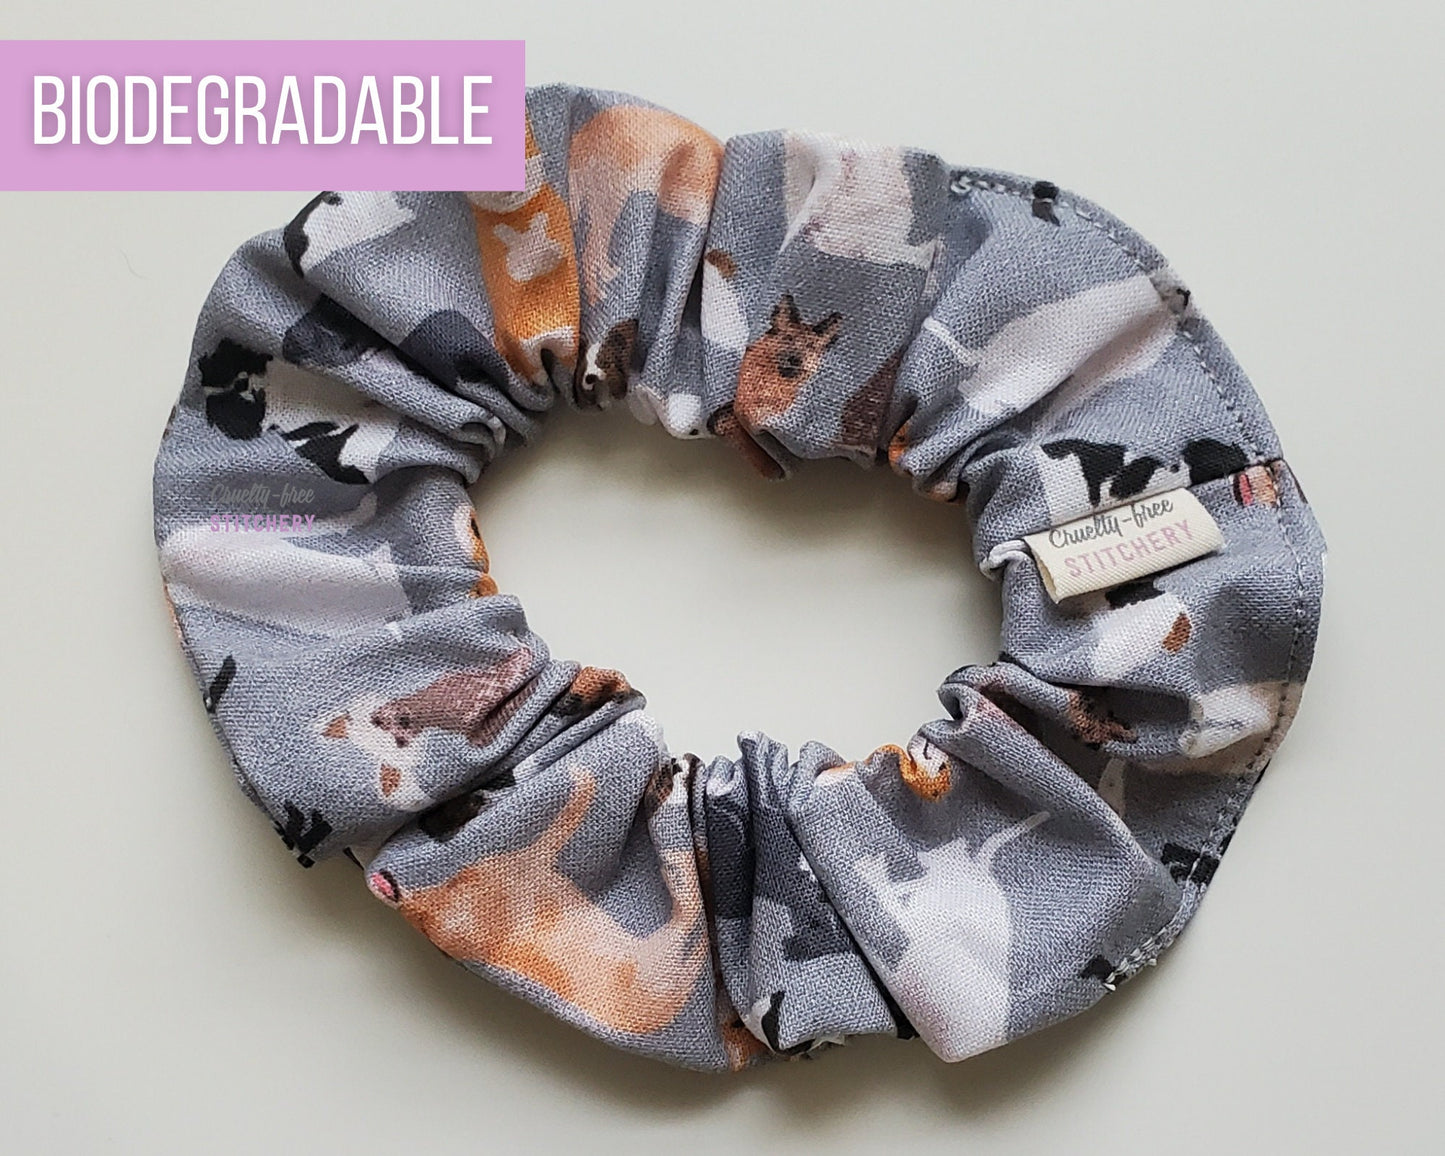 Grey with dogs print scrunchie. A light grey fabric with various printed dogs like German Shepherds, Labs, Poodles, Yorkies, and many more.